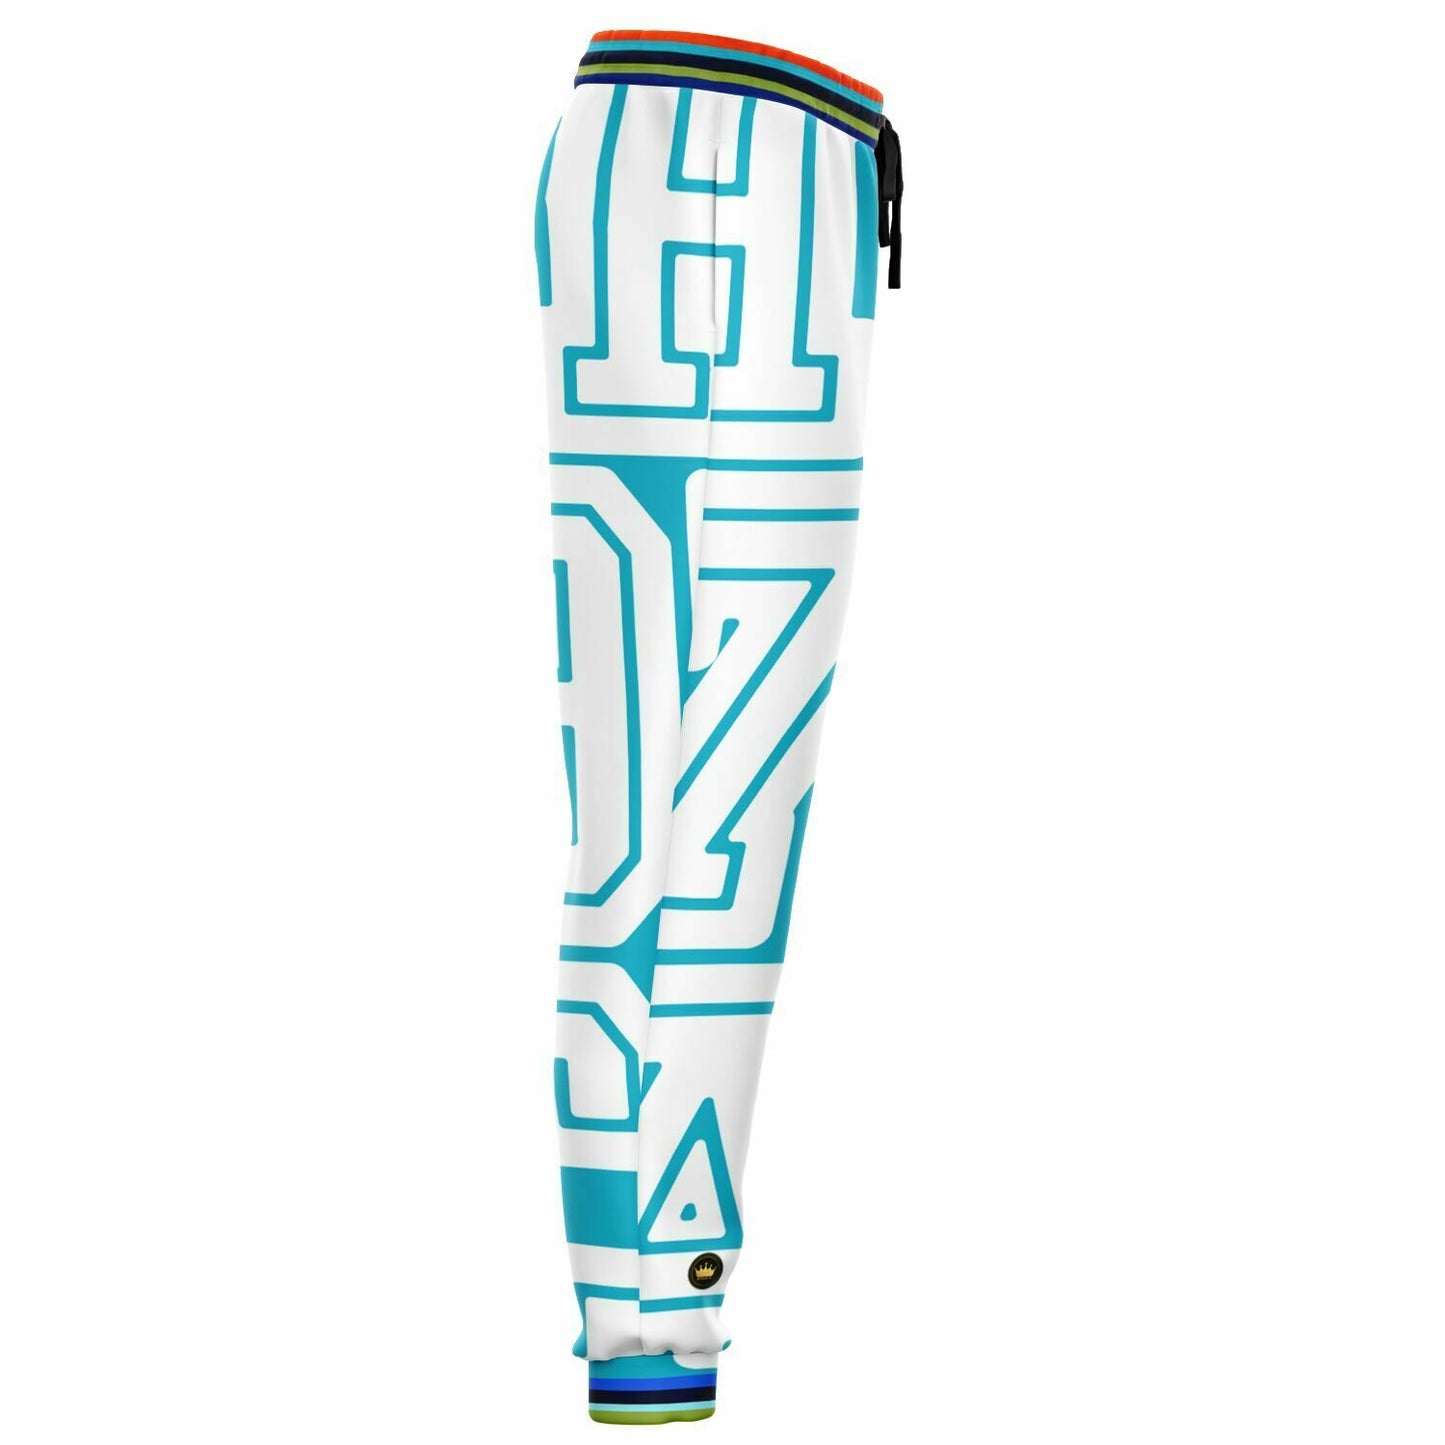 THS 1976 CA Monogram in Bahamian Blue Eco-Poly Unisex Joggers